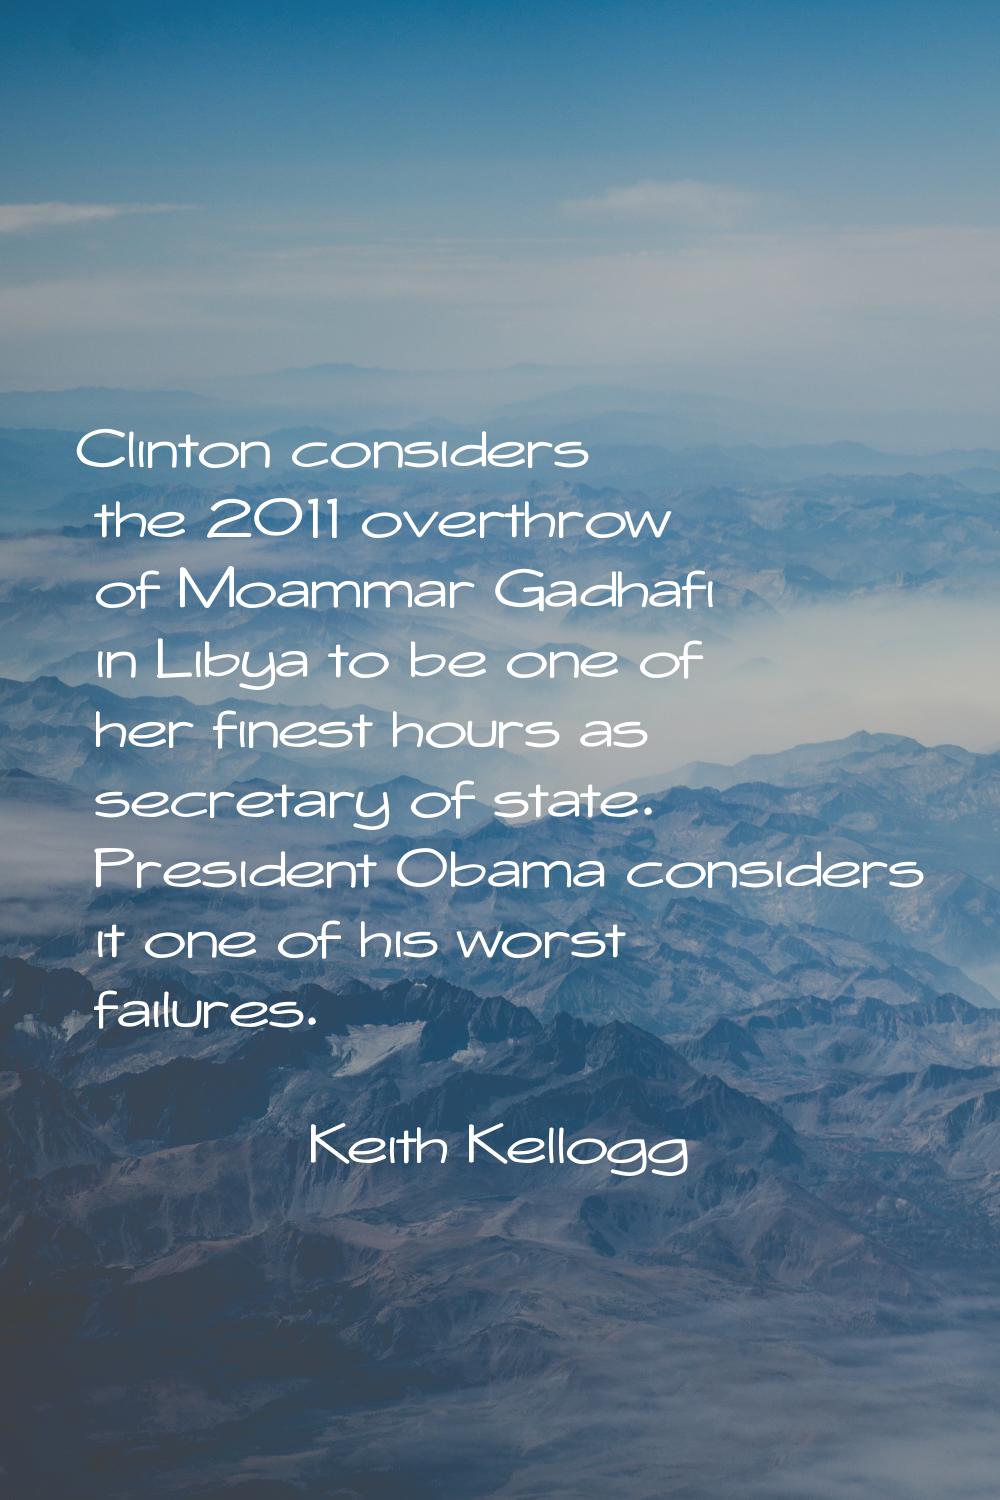 Clinton considers the 2011 overthrow of Moammar Gadhafi in Libya to be one of her finest hours as s